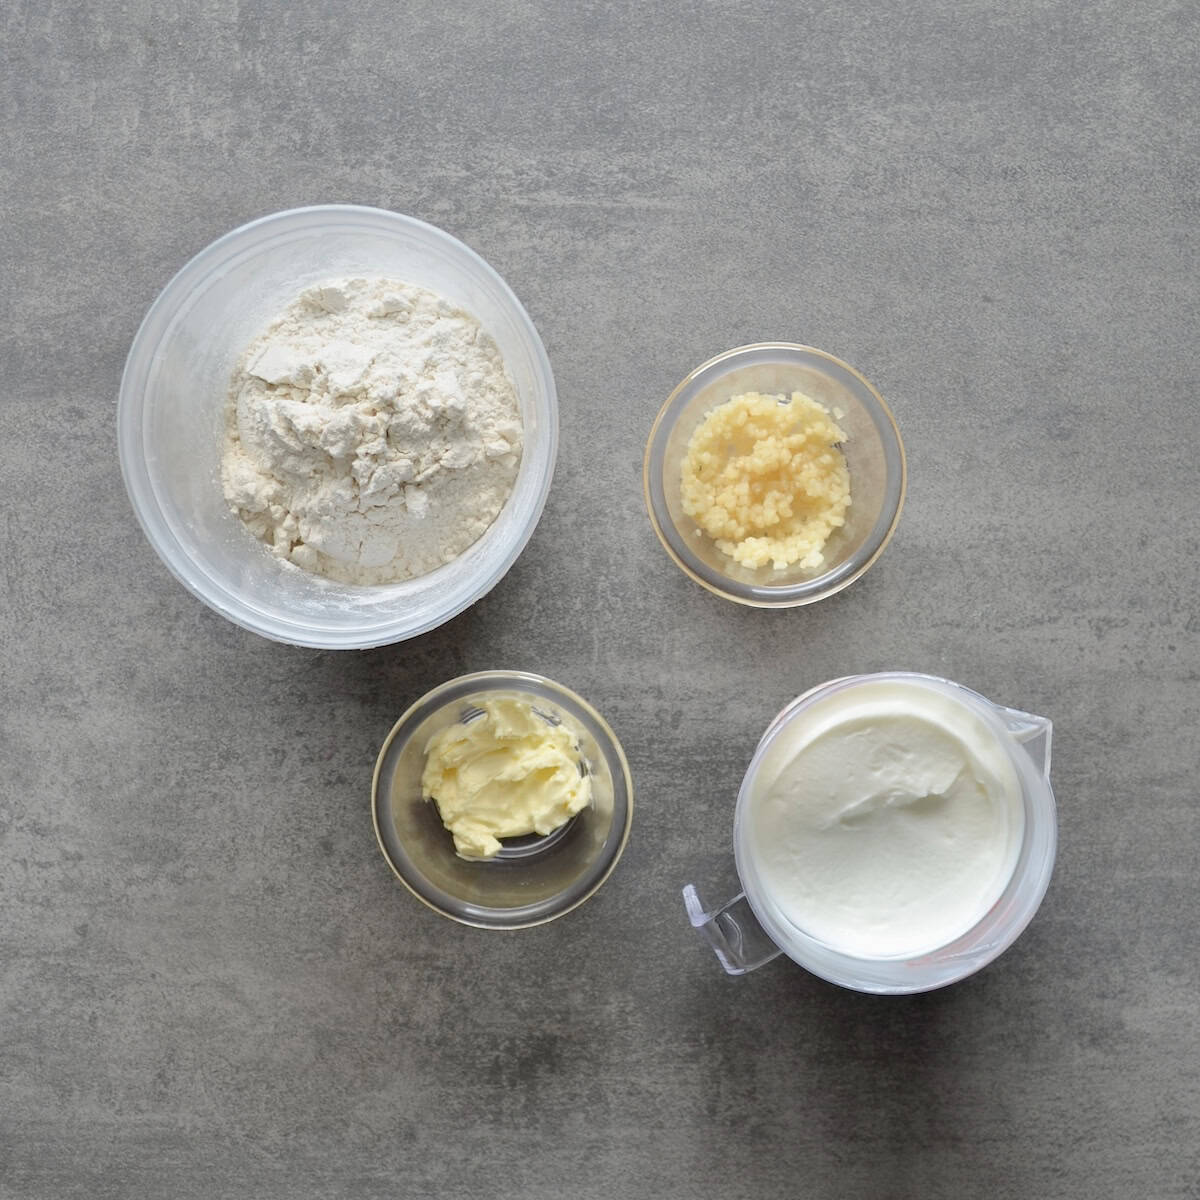 Ingredients for bread dough and garlic butter